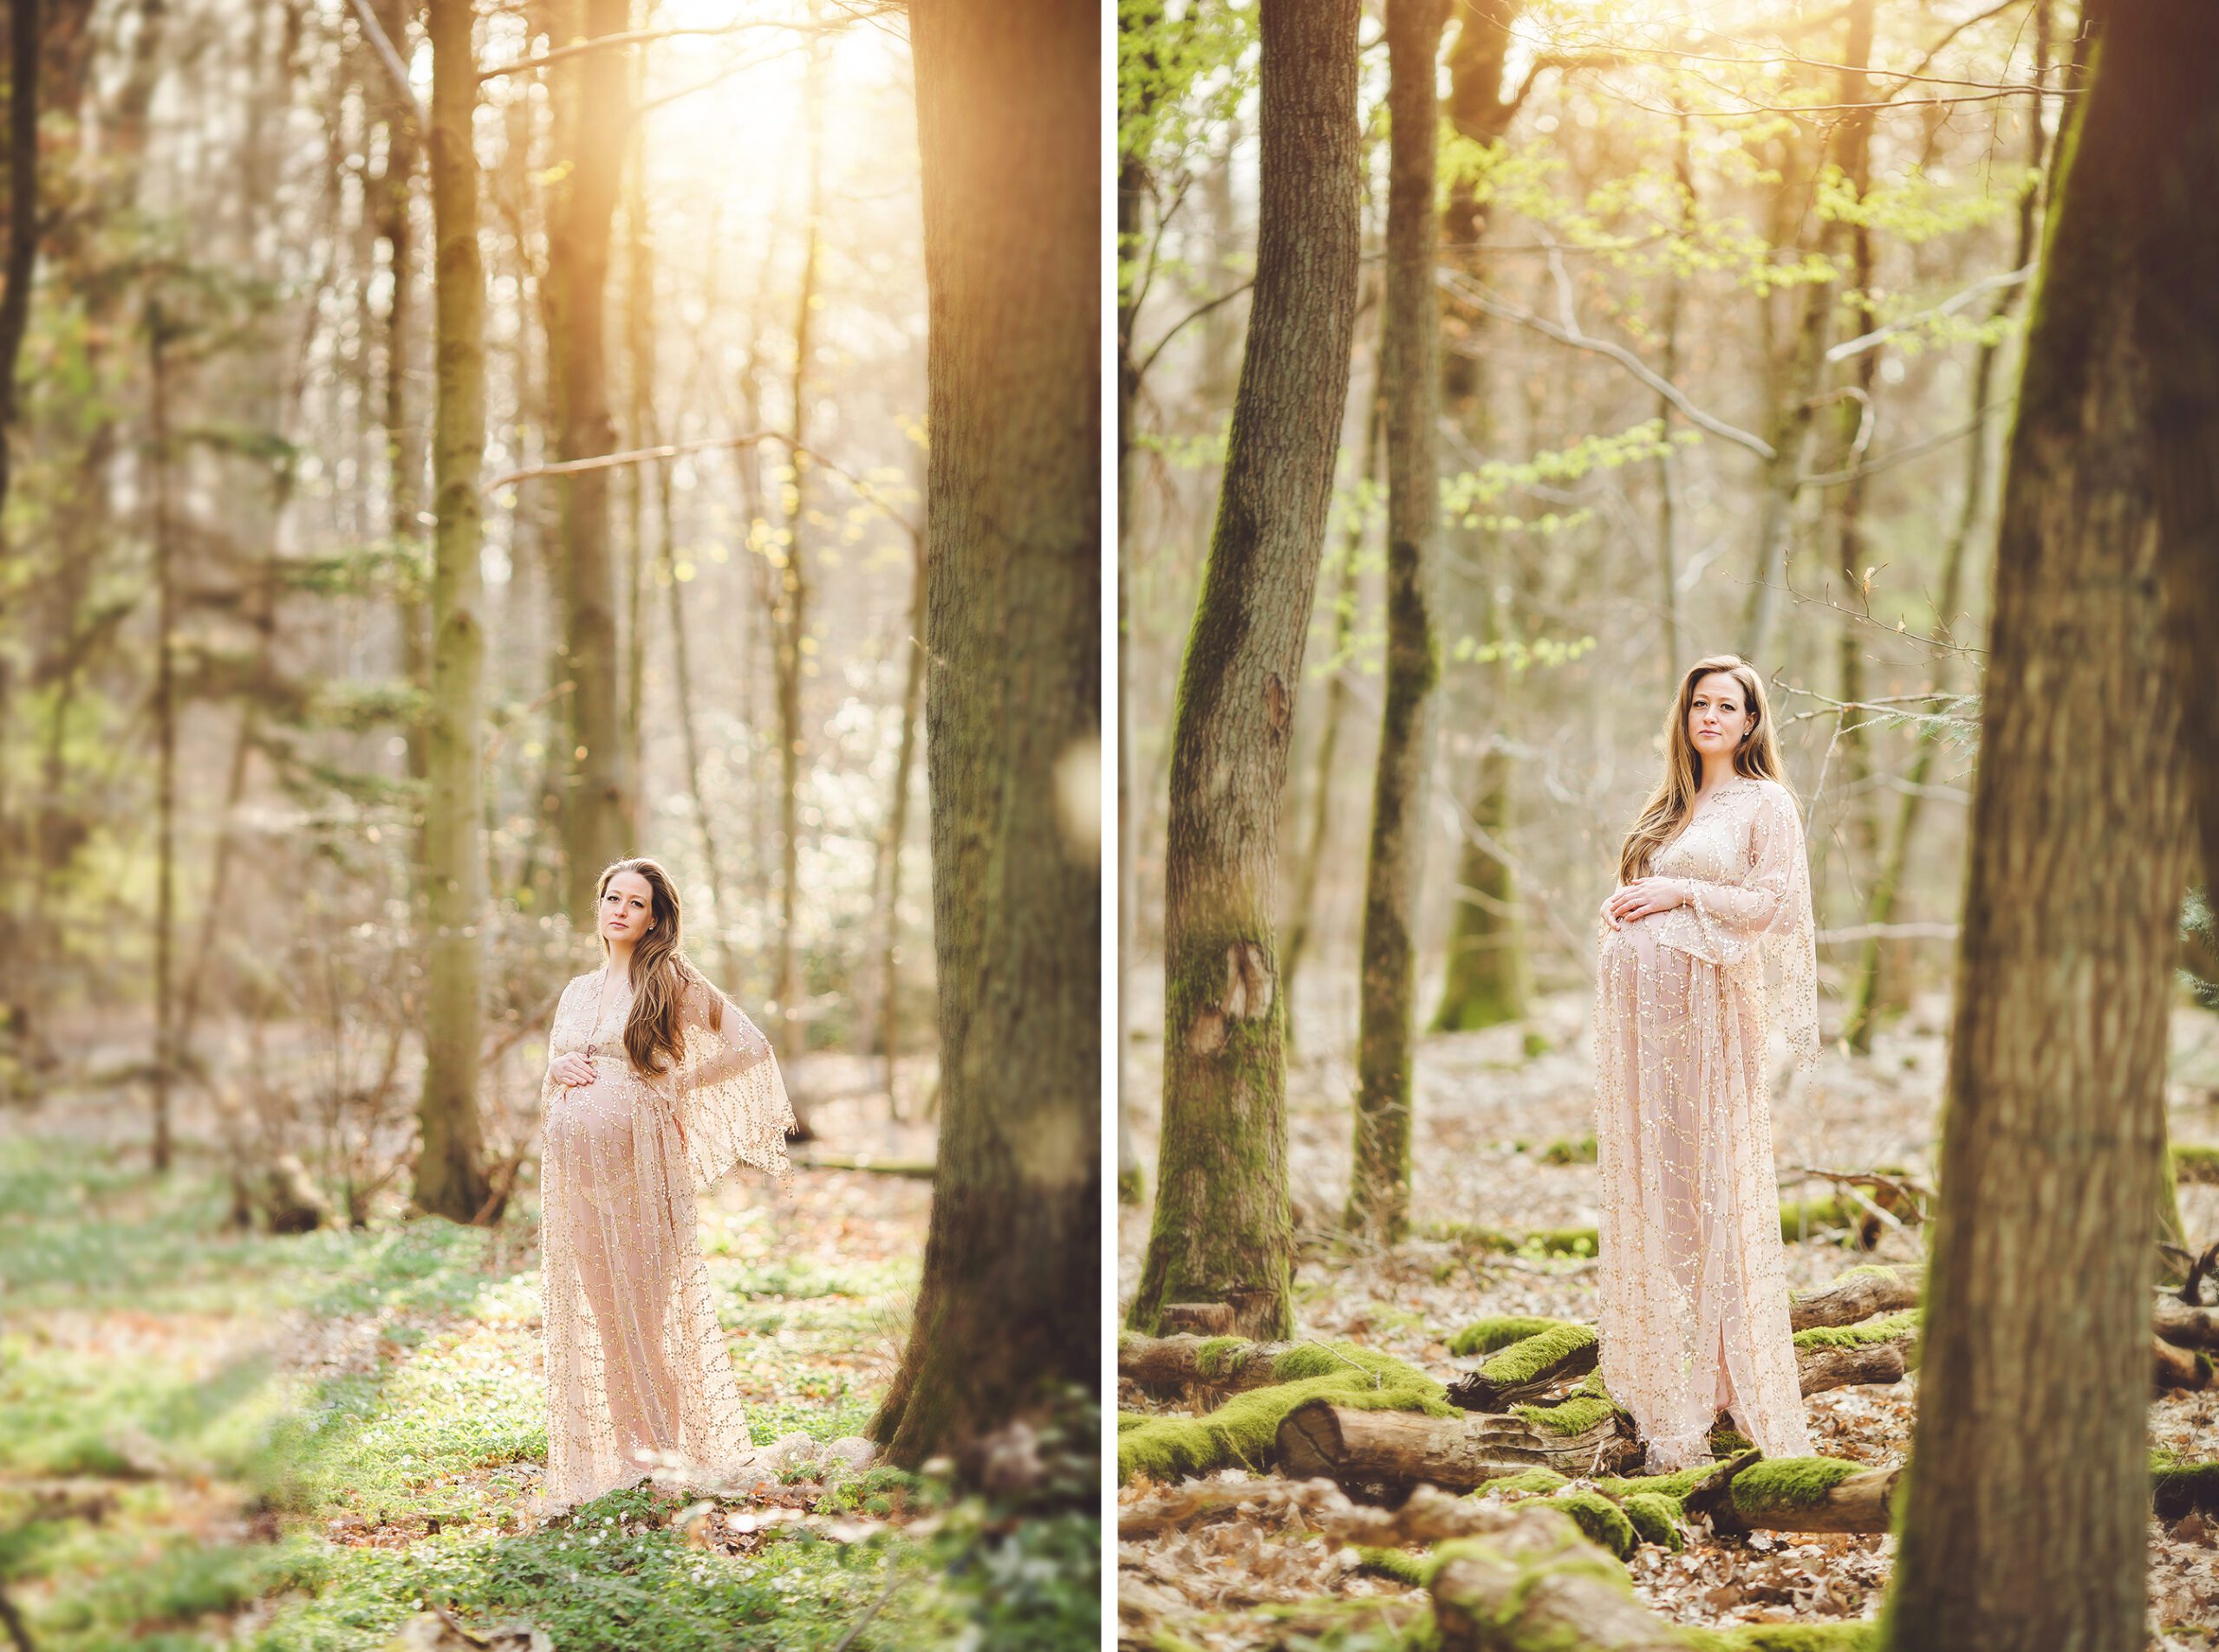 Tabitha amongst the tall trees of the Hartwald during her maternity session near Frankfurt